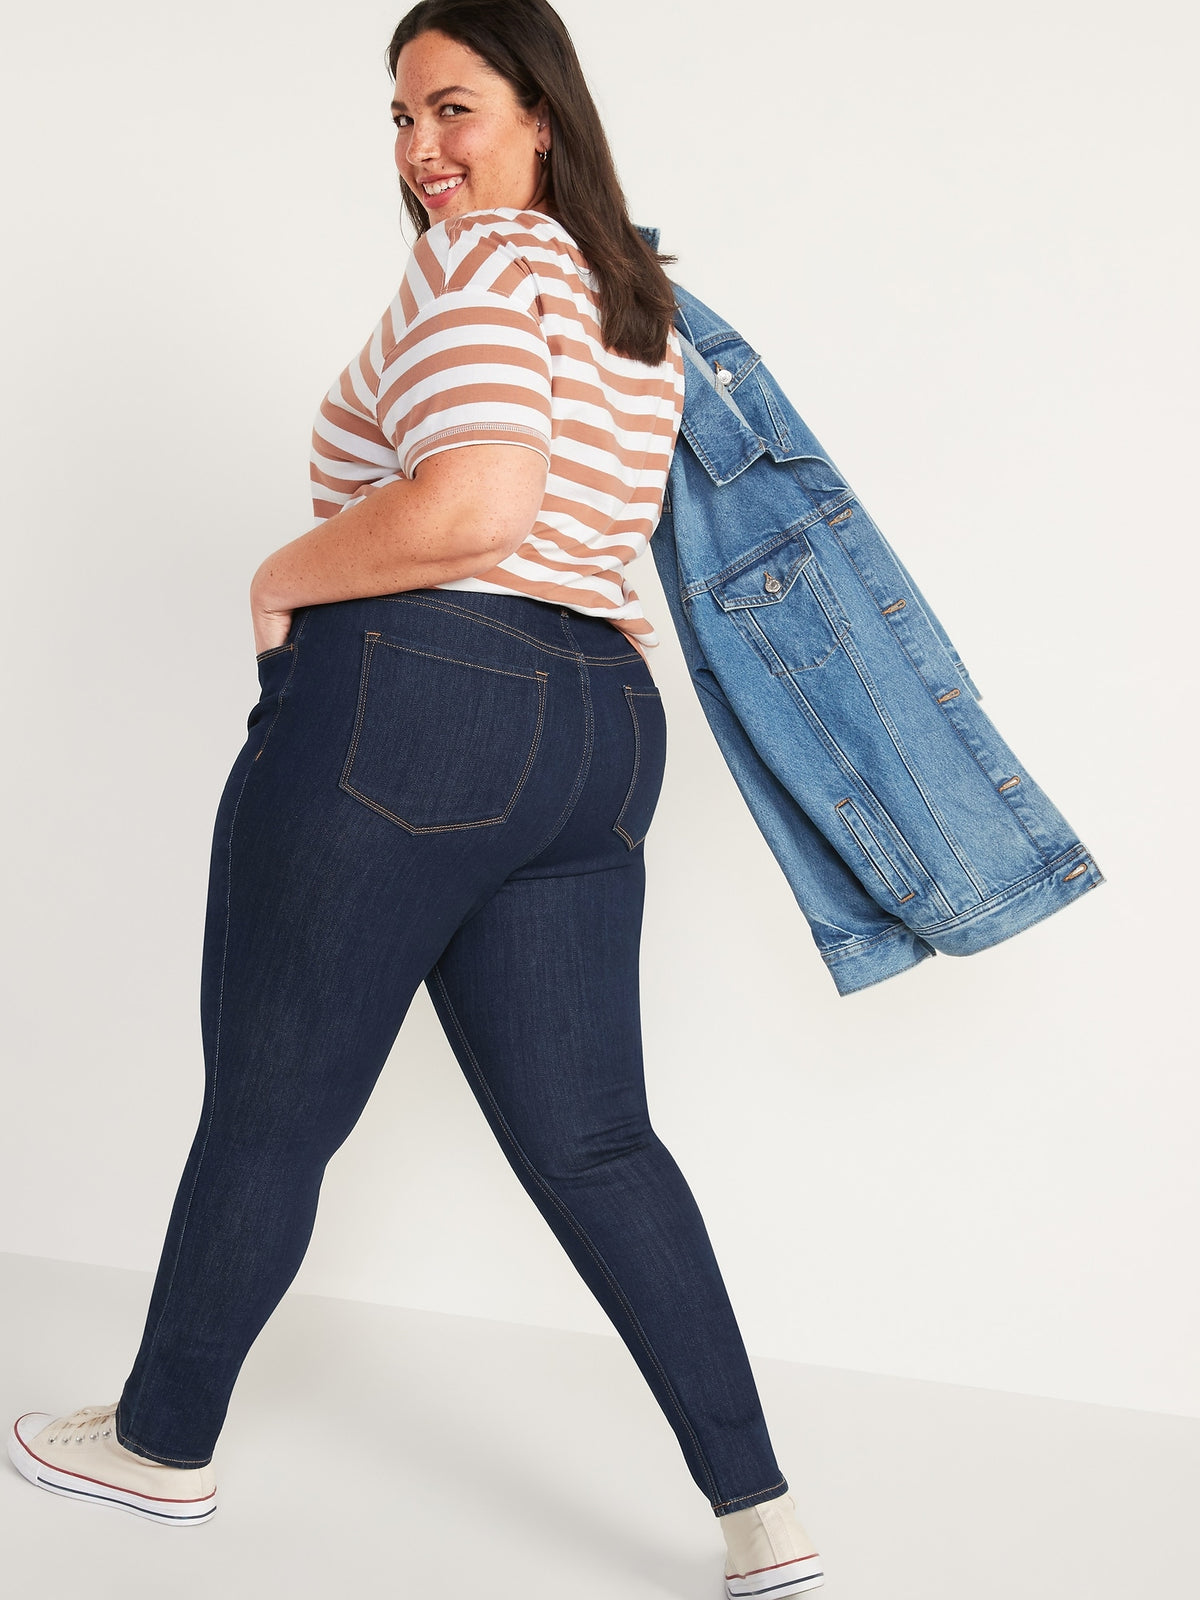 High-Waisted Dark-Wash Super Skinny Jeans for Women - Old Navy Philippines